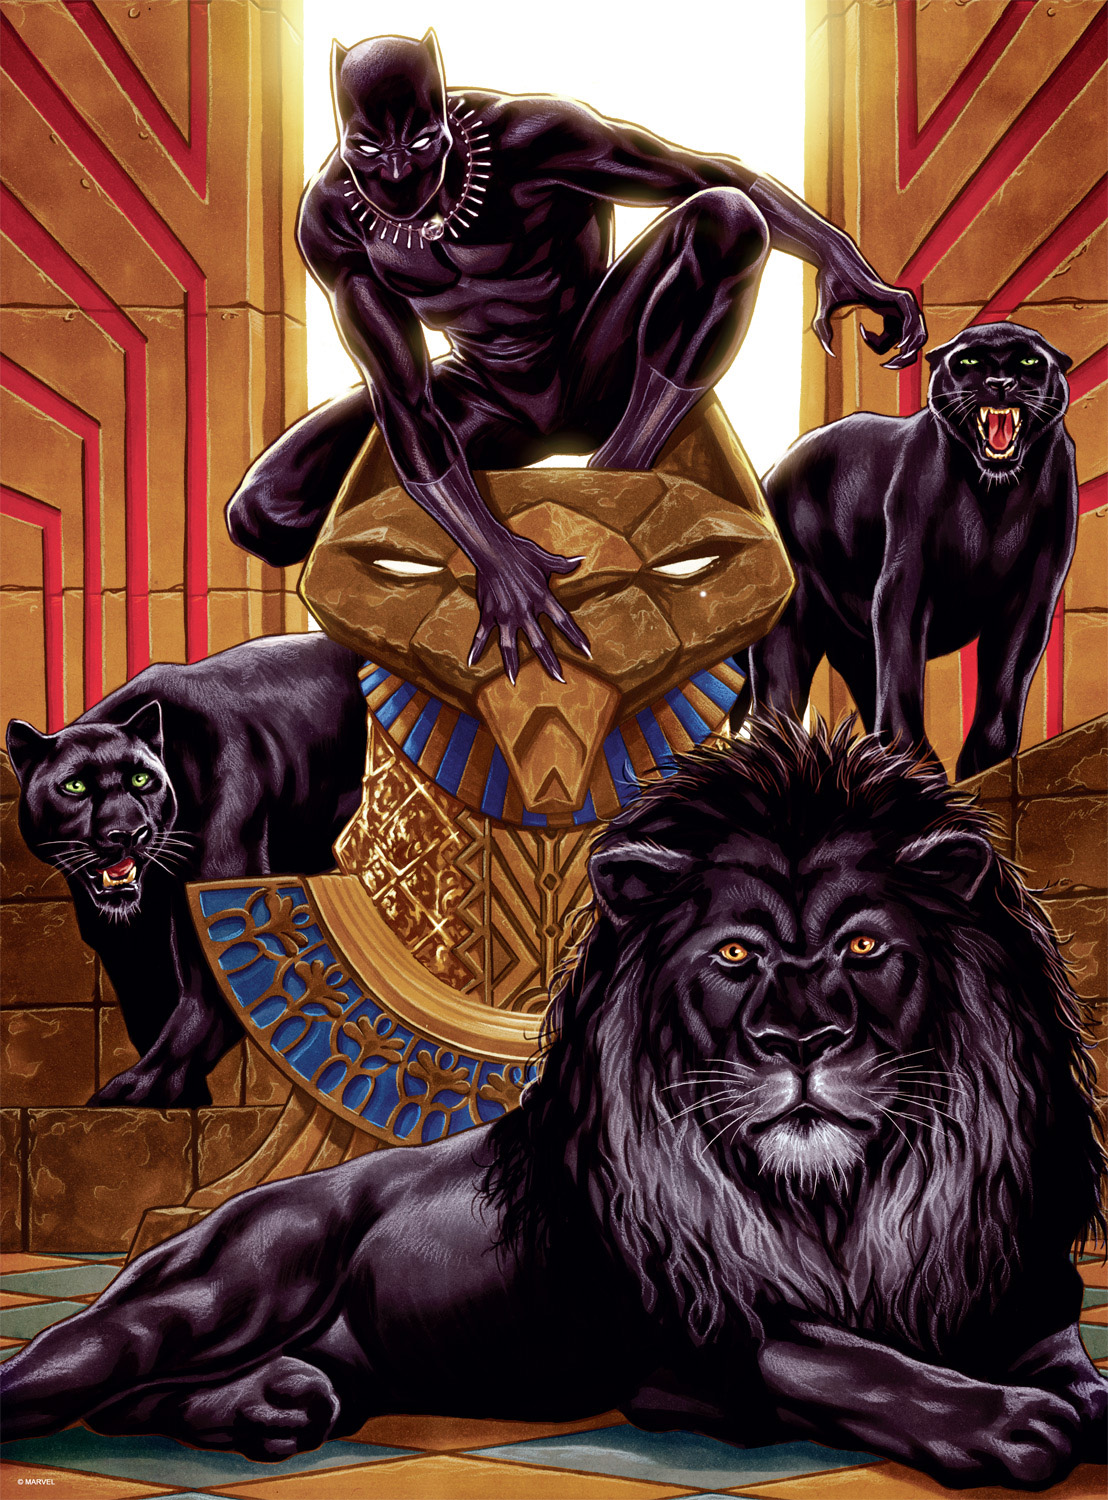 Black Panther (Vol. 6) #1 Variant Movies & TV Jigsaw Puzzle